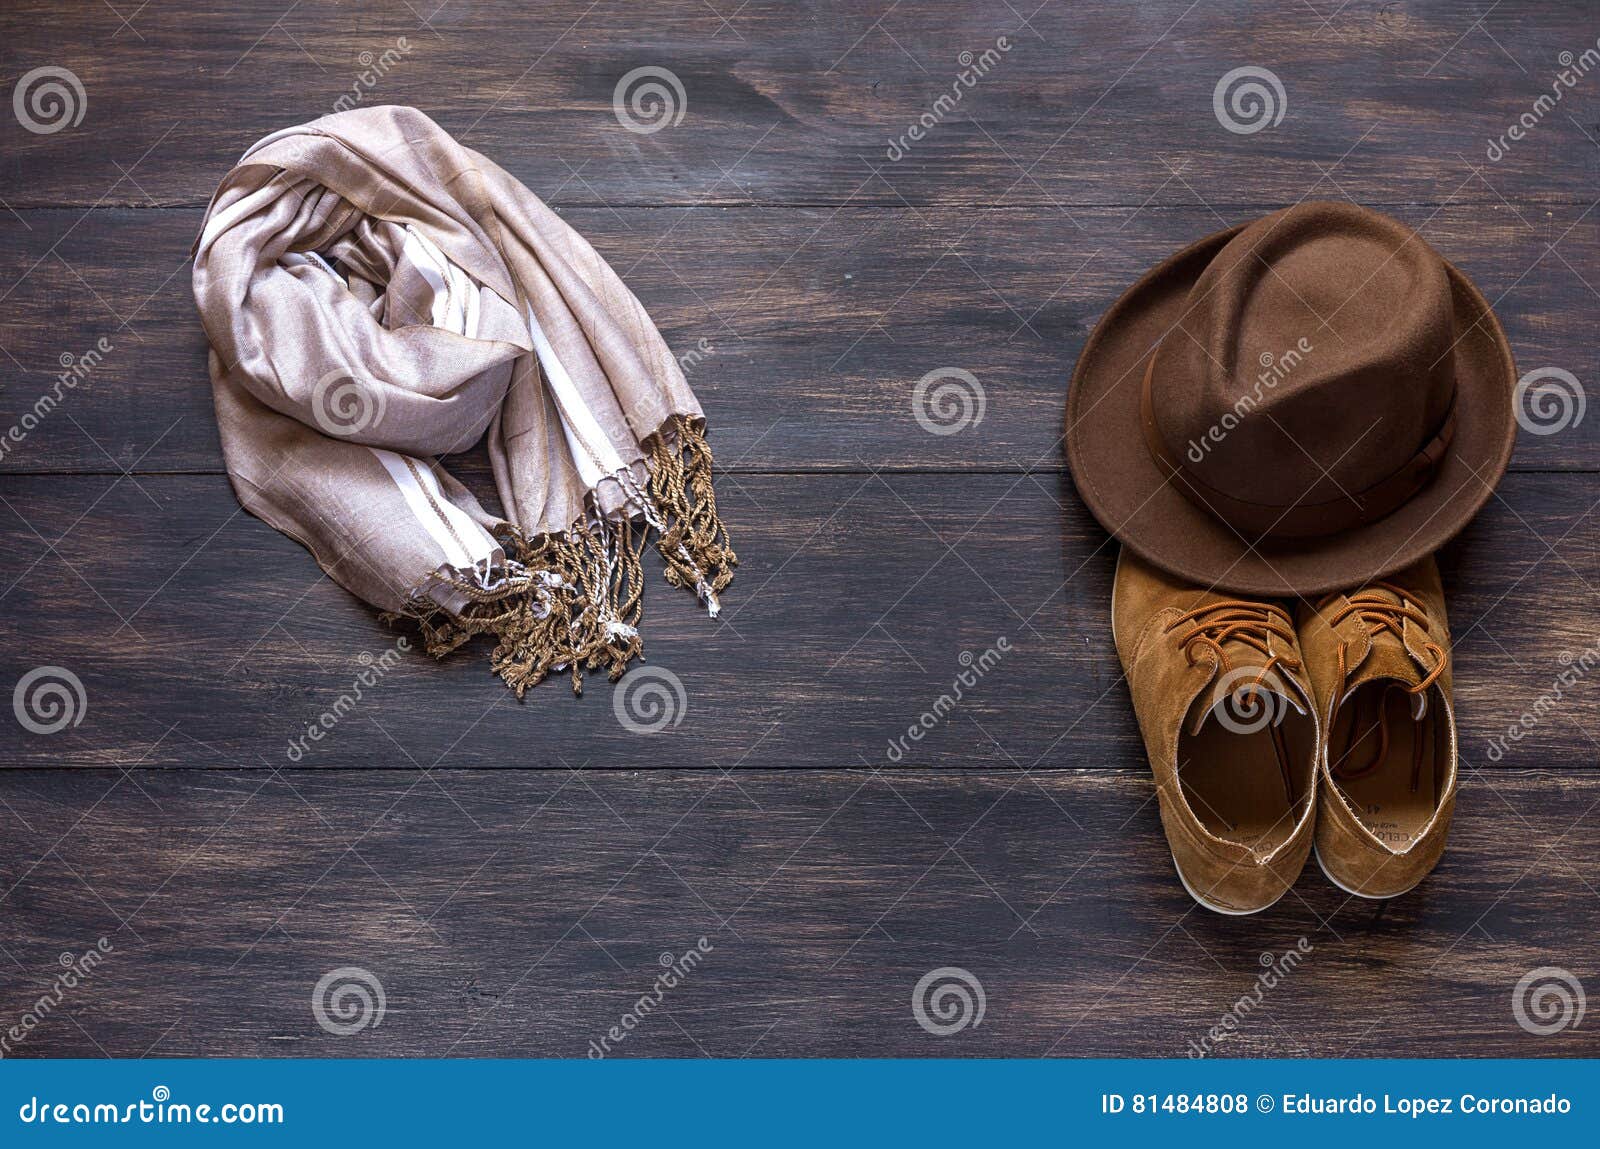 Clothing and Fashion Accessories on Wooden Table Stock Photo - Image of ...